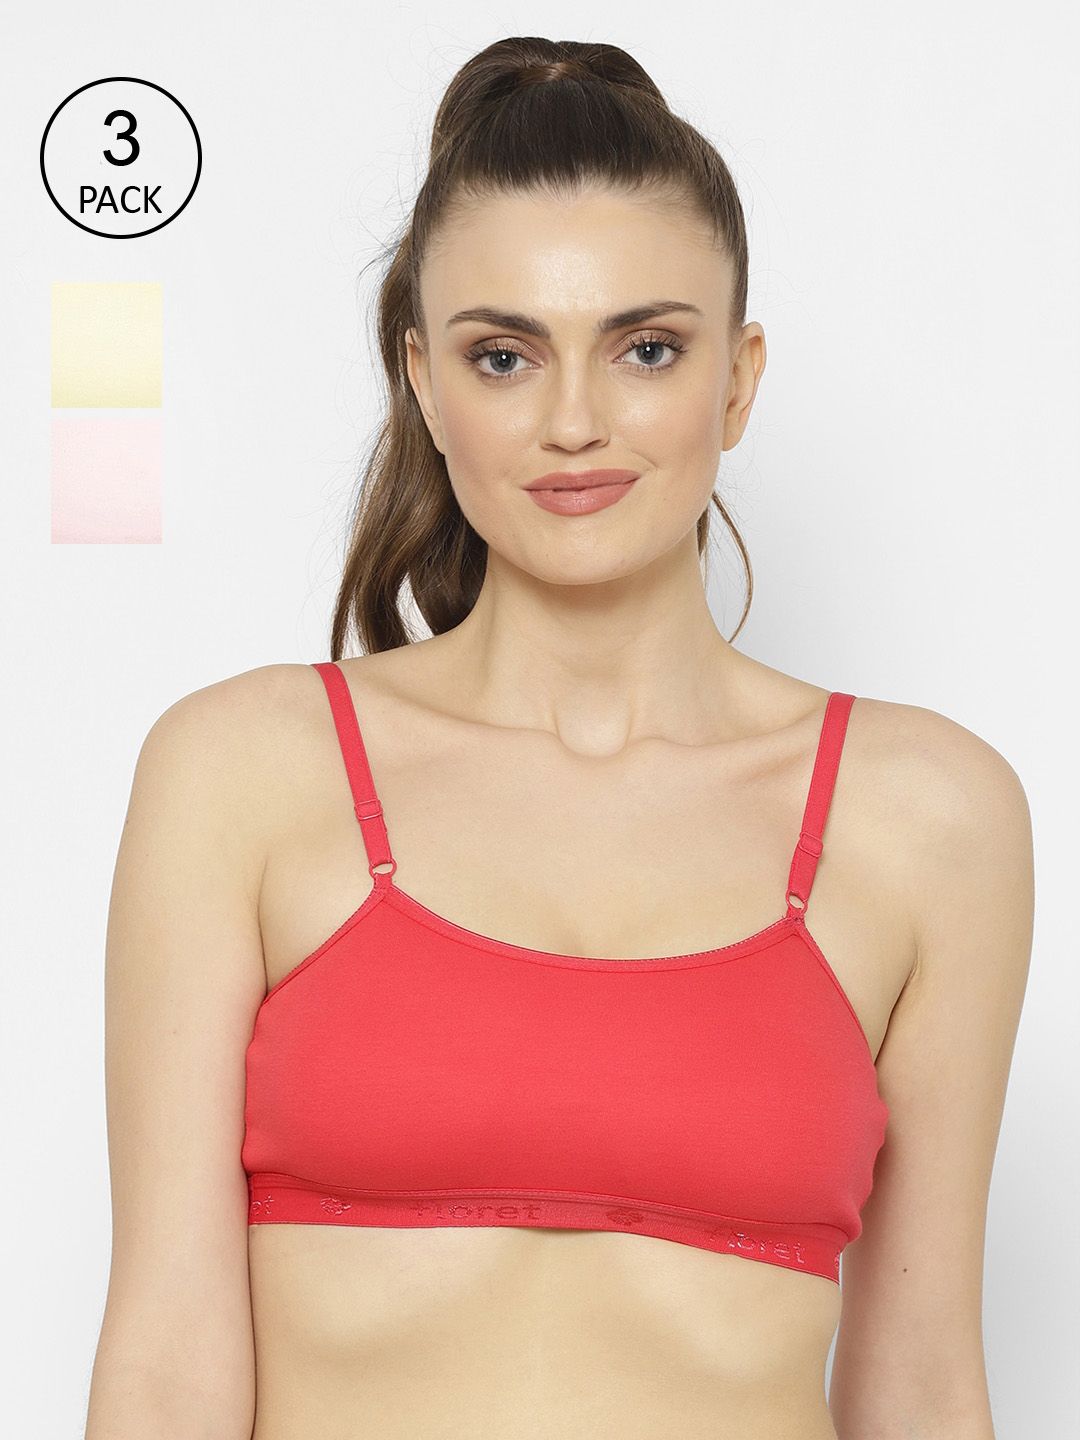 Floret Pink & Coral Solid  Set of 3 Workout Bra 1492_Pink-Tomato-Lemon-Pink-Tomato Price in India